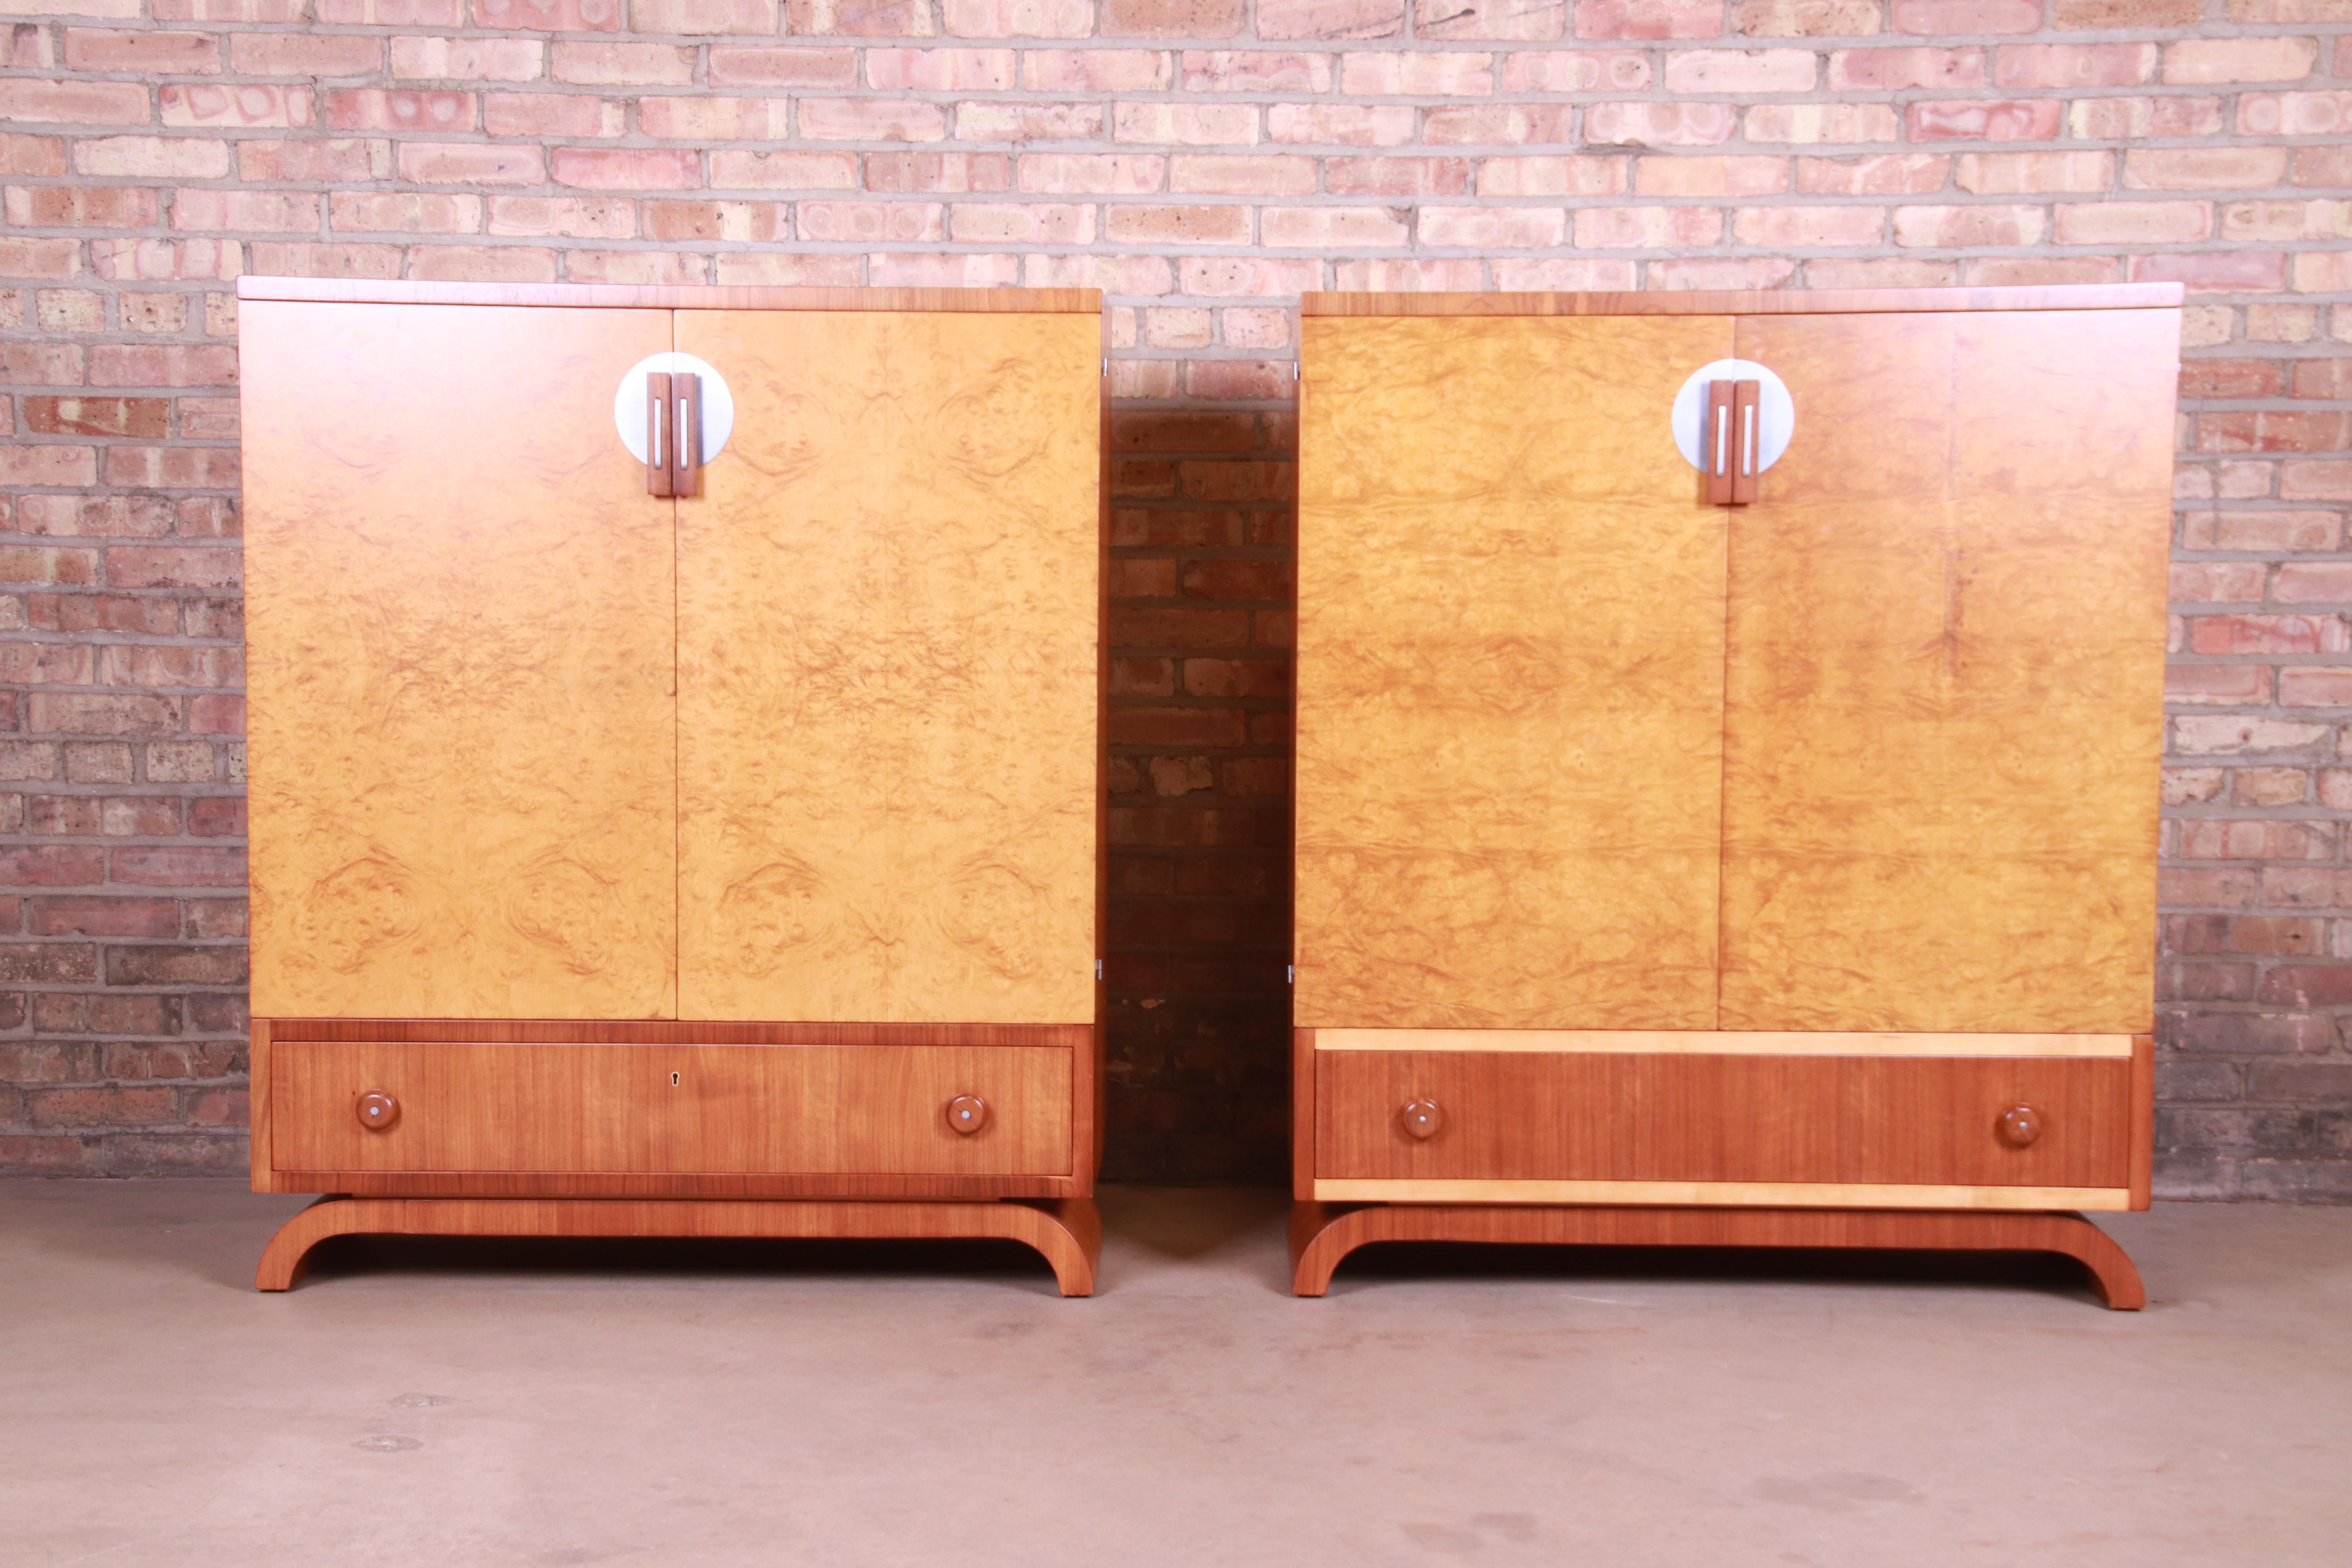 An exceptional pair of antique Art Deco highboy dressers or gentleman's chests

Designed by Ralph Widdicomb for John Widdicomb Furniture Co.

USA, circa 1940s

Bookmatched burled olive wood and walnut, with original walnut and aluminum